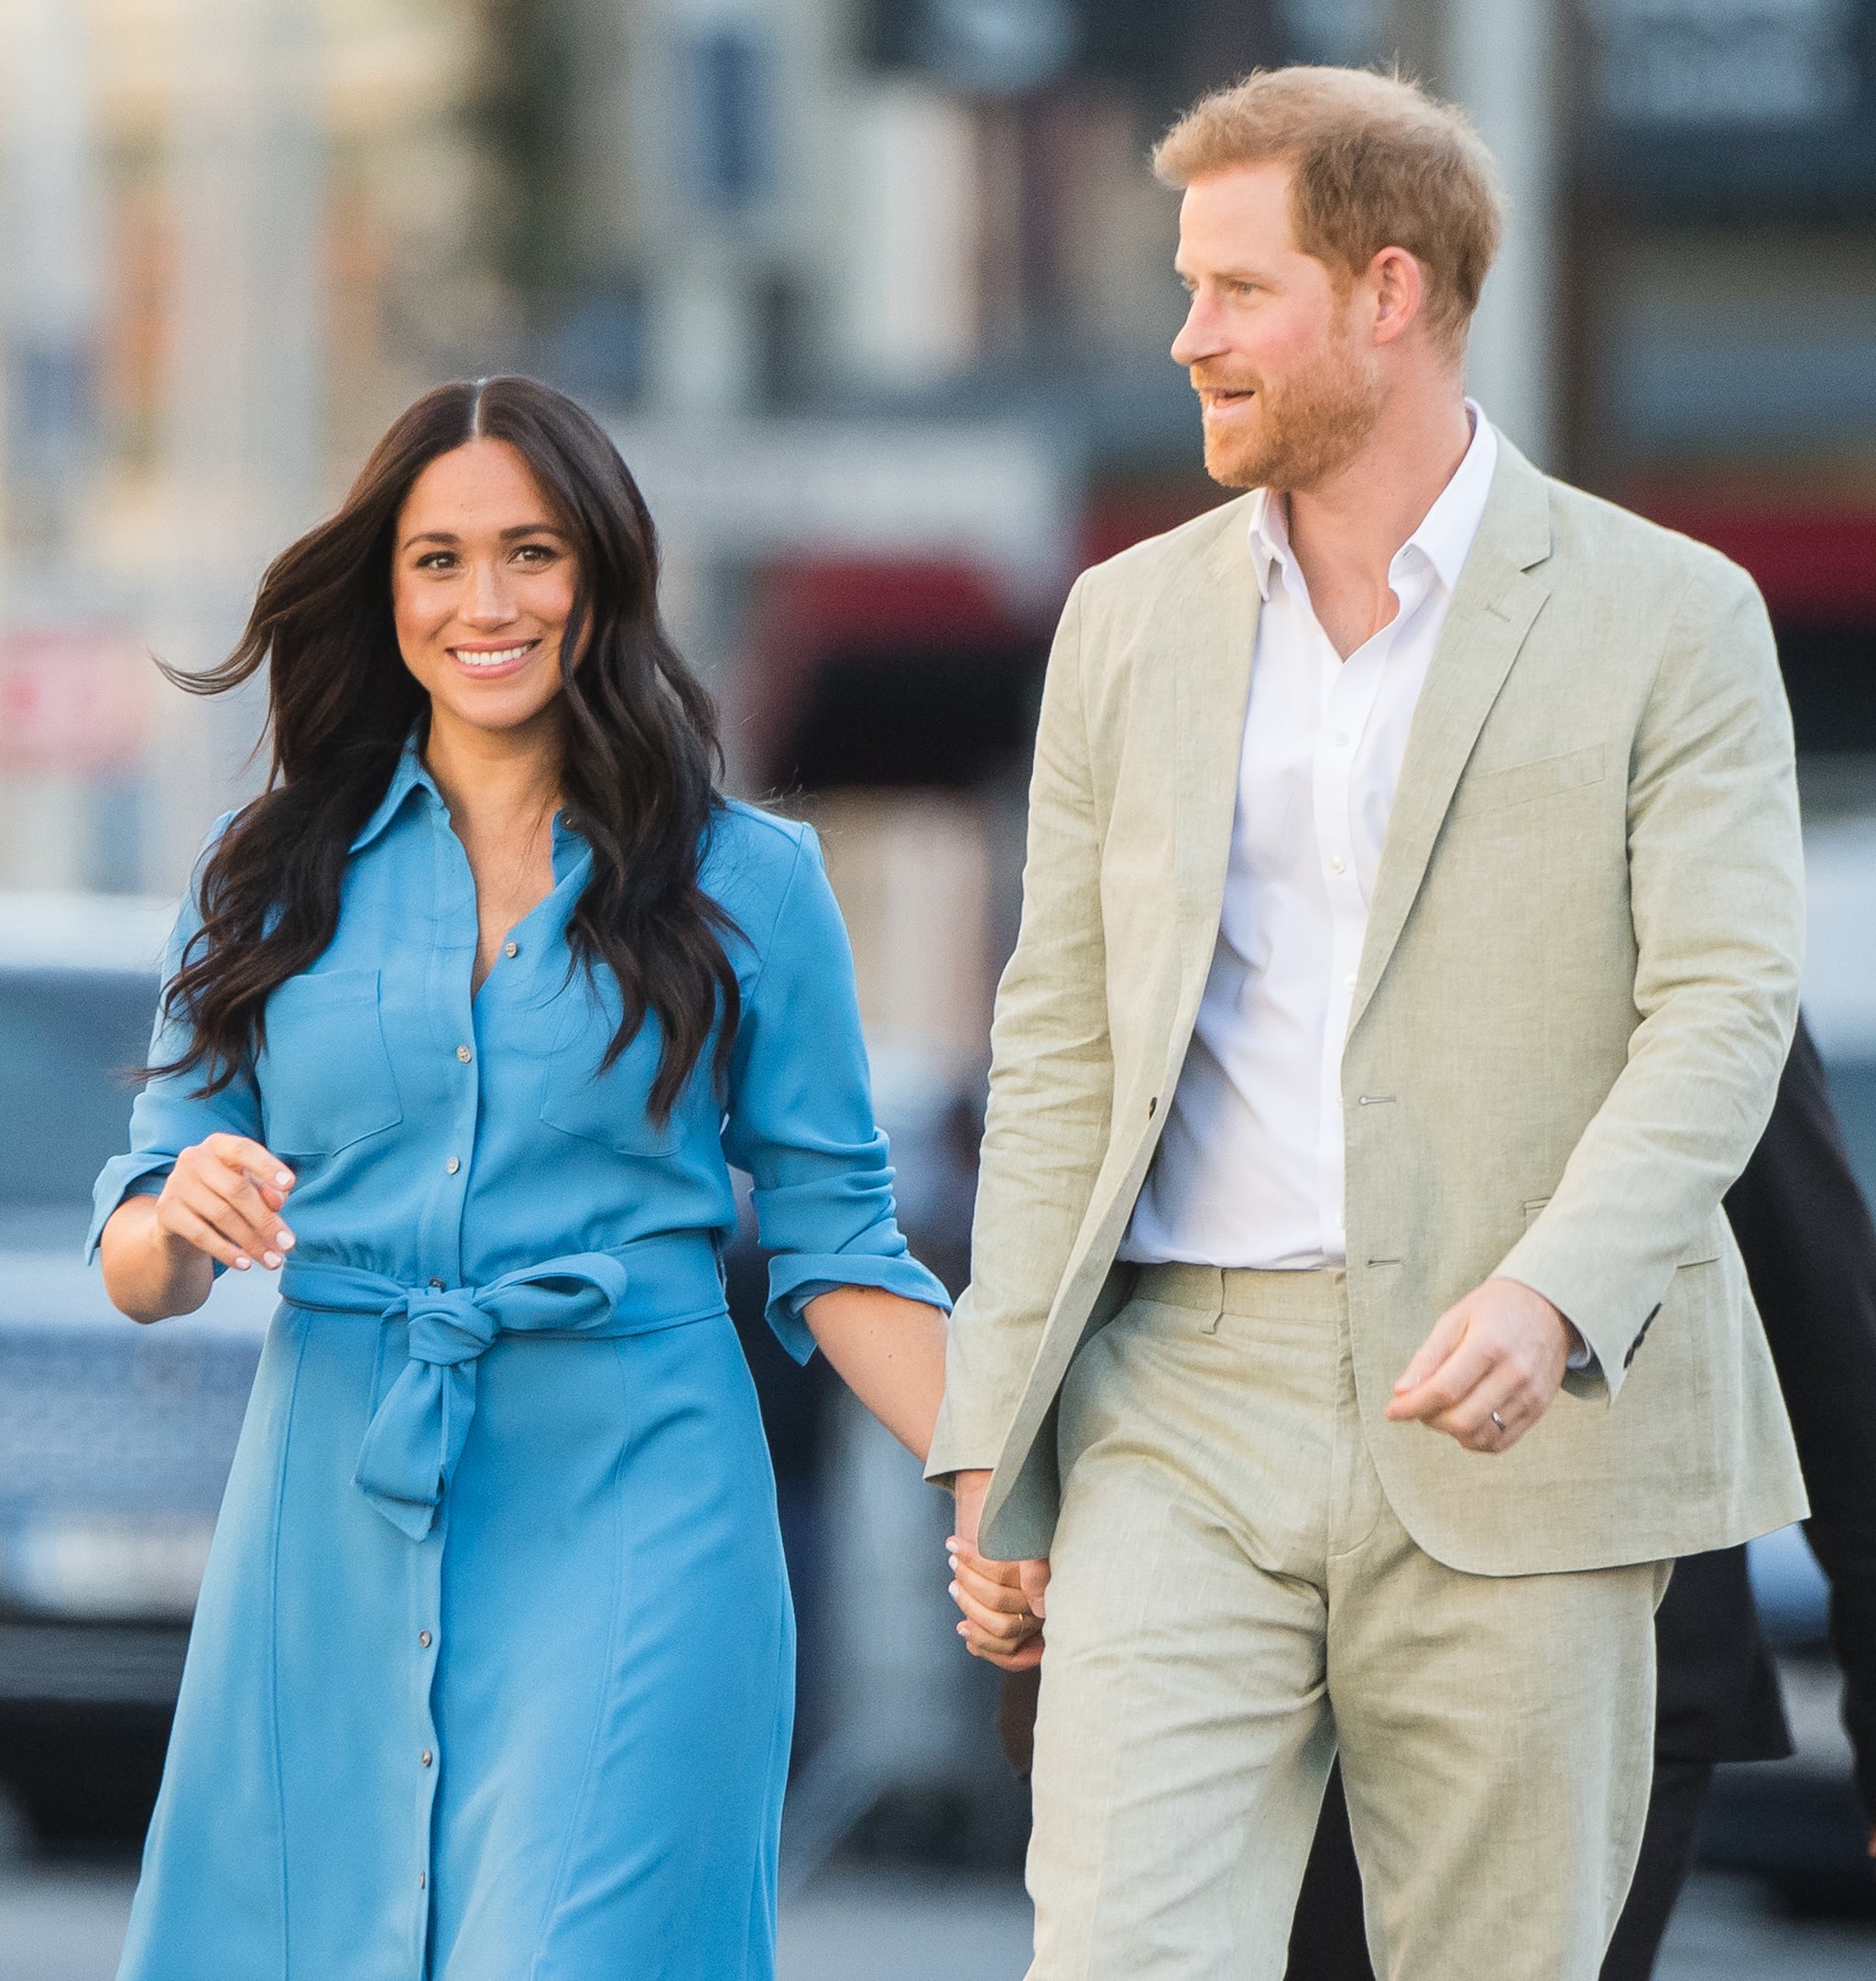 CAPE TOWN, SOUTH AFRICA - SEPTEMBER 23: Meghan, Duchess of Sussex and Prince Harry, Duke of Sussex visit  the District 6 Museum and Homecoming Centre during their royal tour of South Africa on September 23, 2019 in Cape Town, South Africa. District 6 was a former inner-city residential area where different communities and races lived side by side, until 1966 when the Apartheid government declared the area whites-only and 60,000 residents were forcibly removed and relocated.  (Photo by Samir Hussein/WireImage)